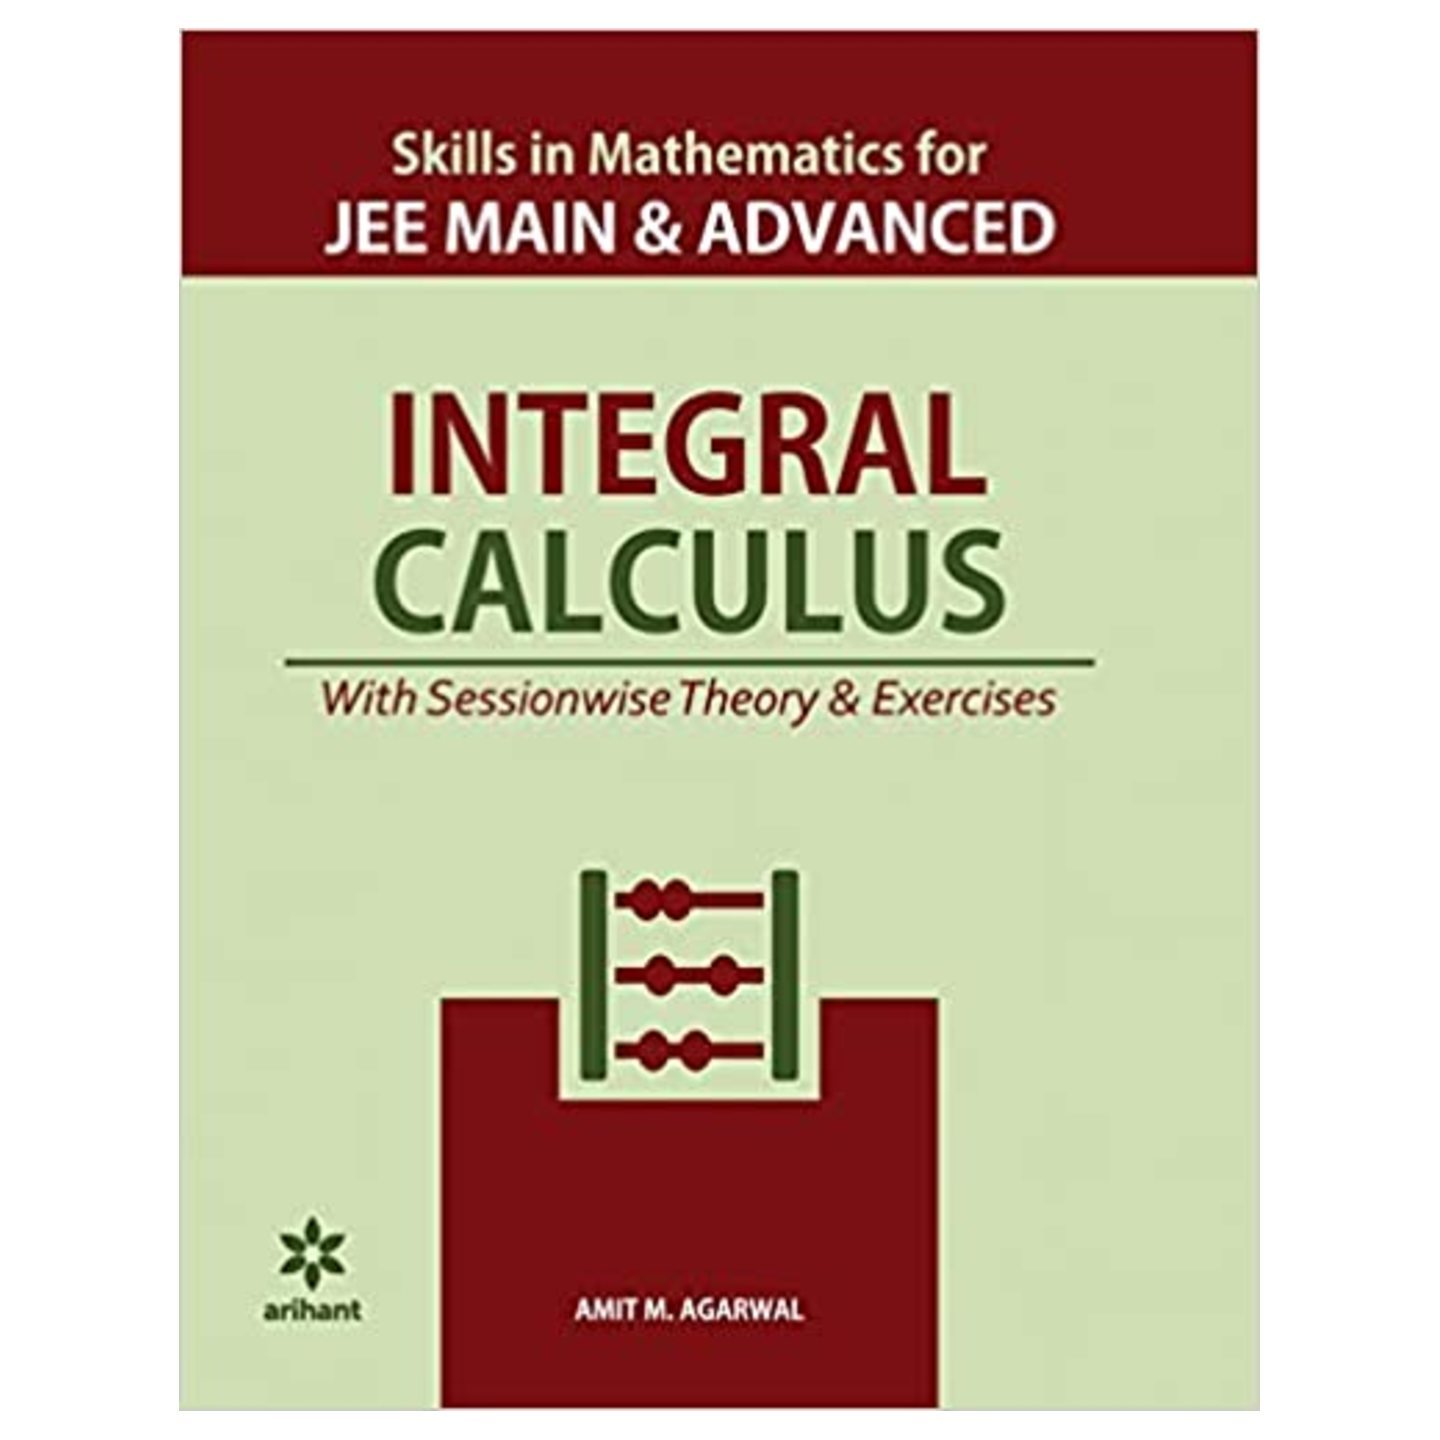 ARIHANT Skills in Mathematics - Integral Calculus for JEE Main and Advanced AMIT M AGARWAL